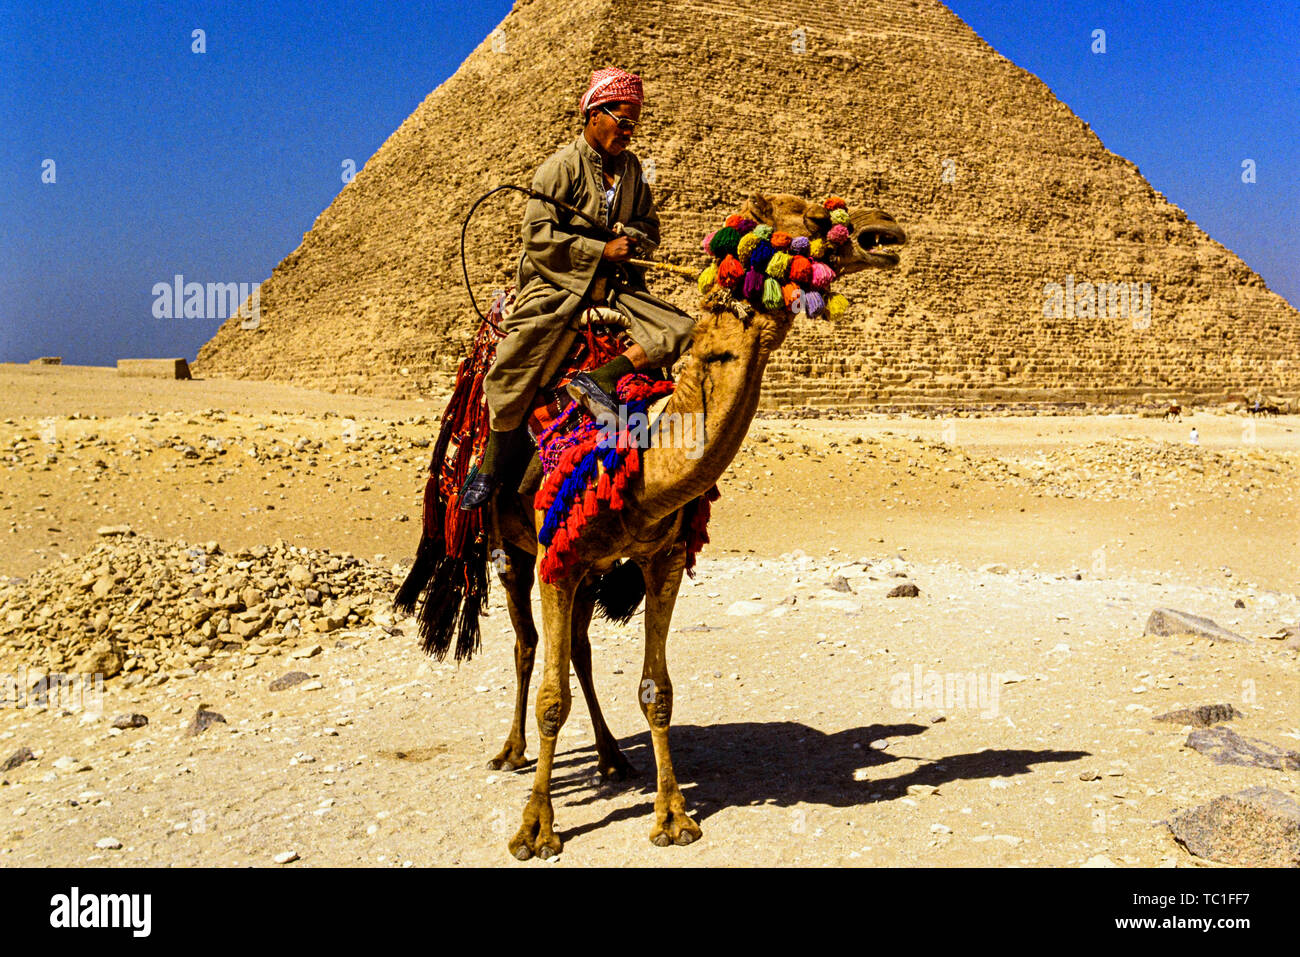 Photo: © Simon Grosset. The Giza Pyramid complex, or Giza Necropolis, near Cairo, Egypt. A man rides a camel in front of the Great Pyramid of Giza, on Stock Photo